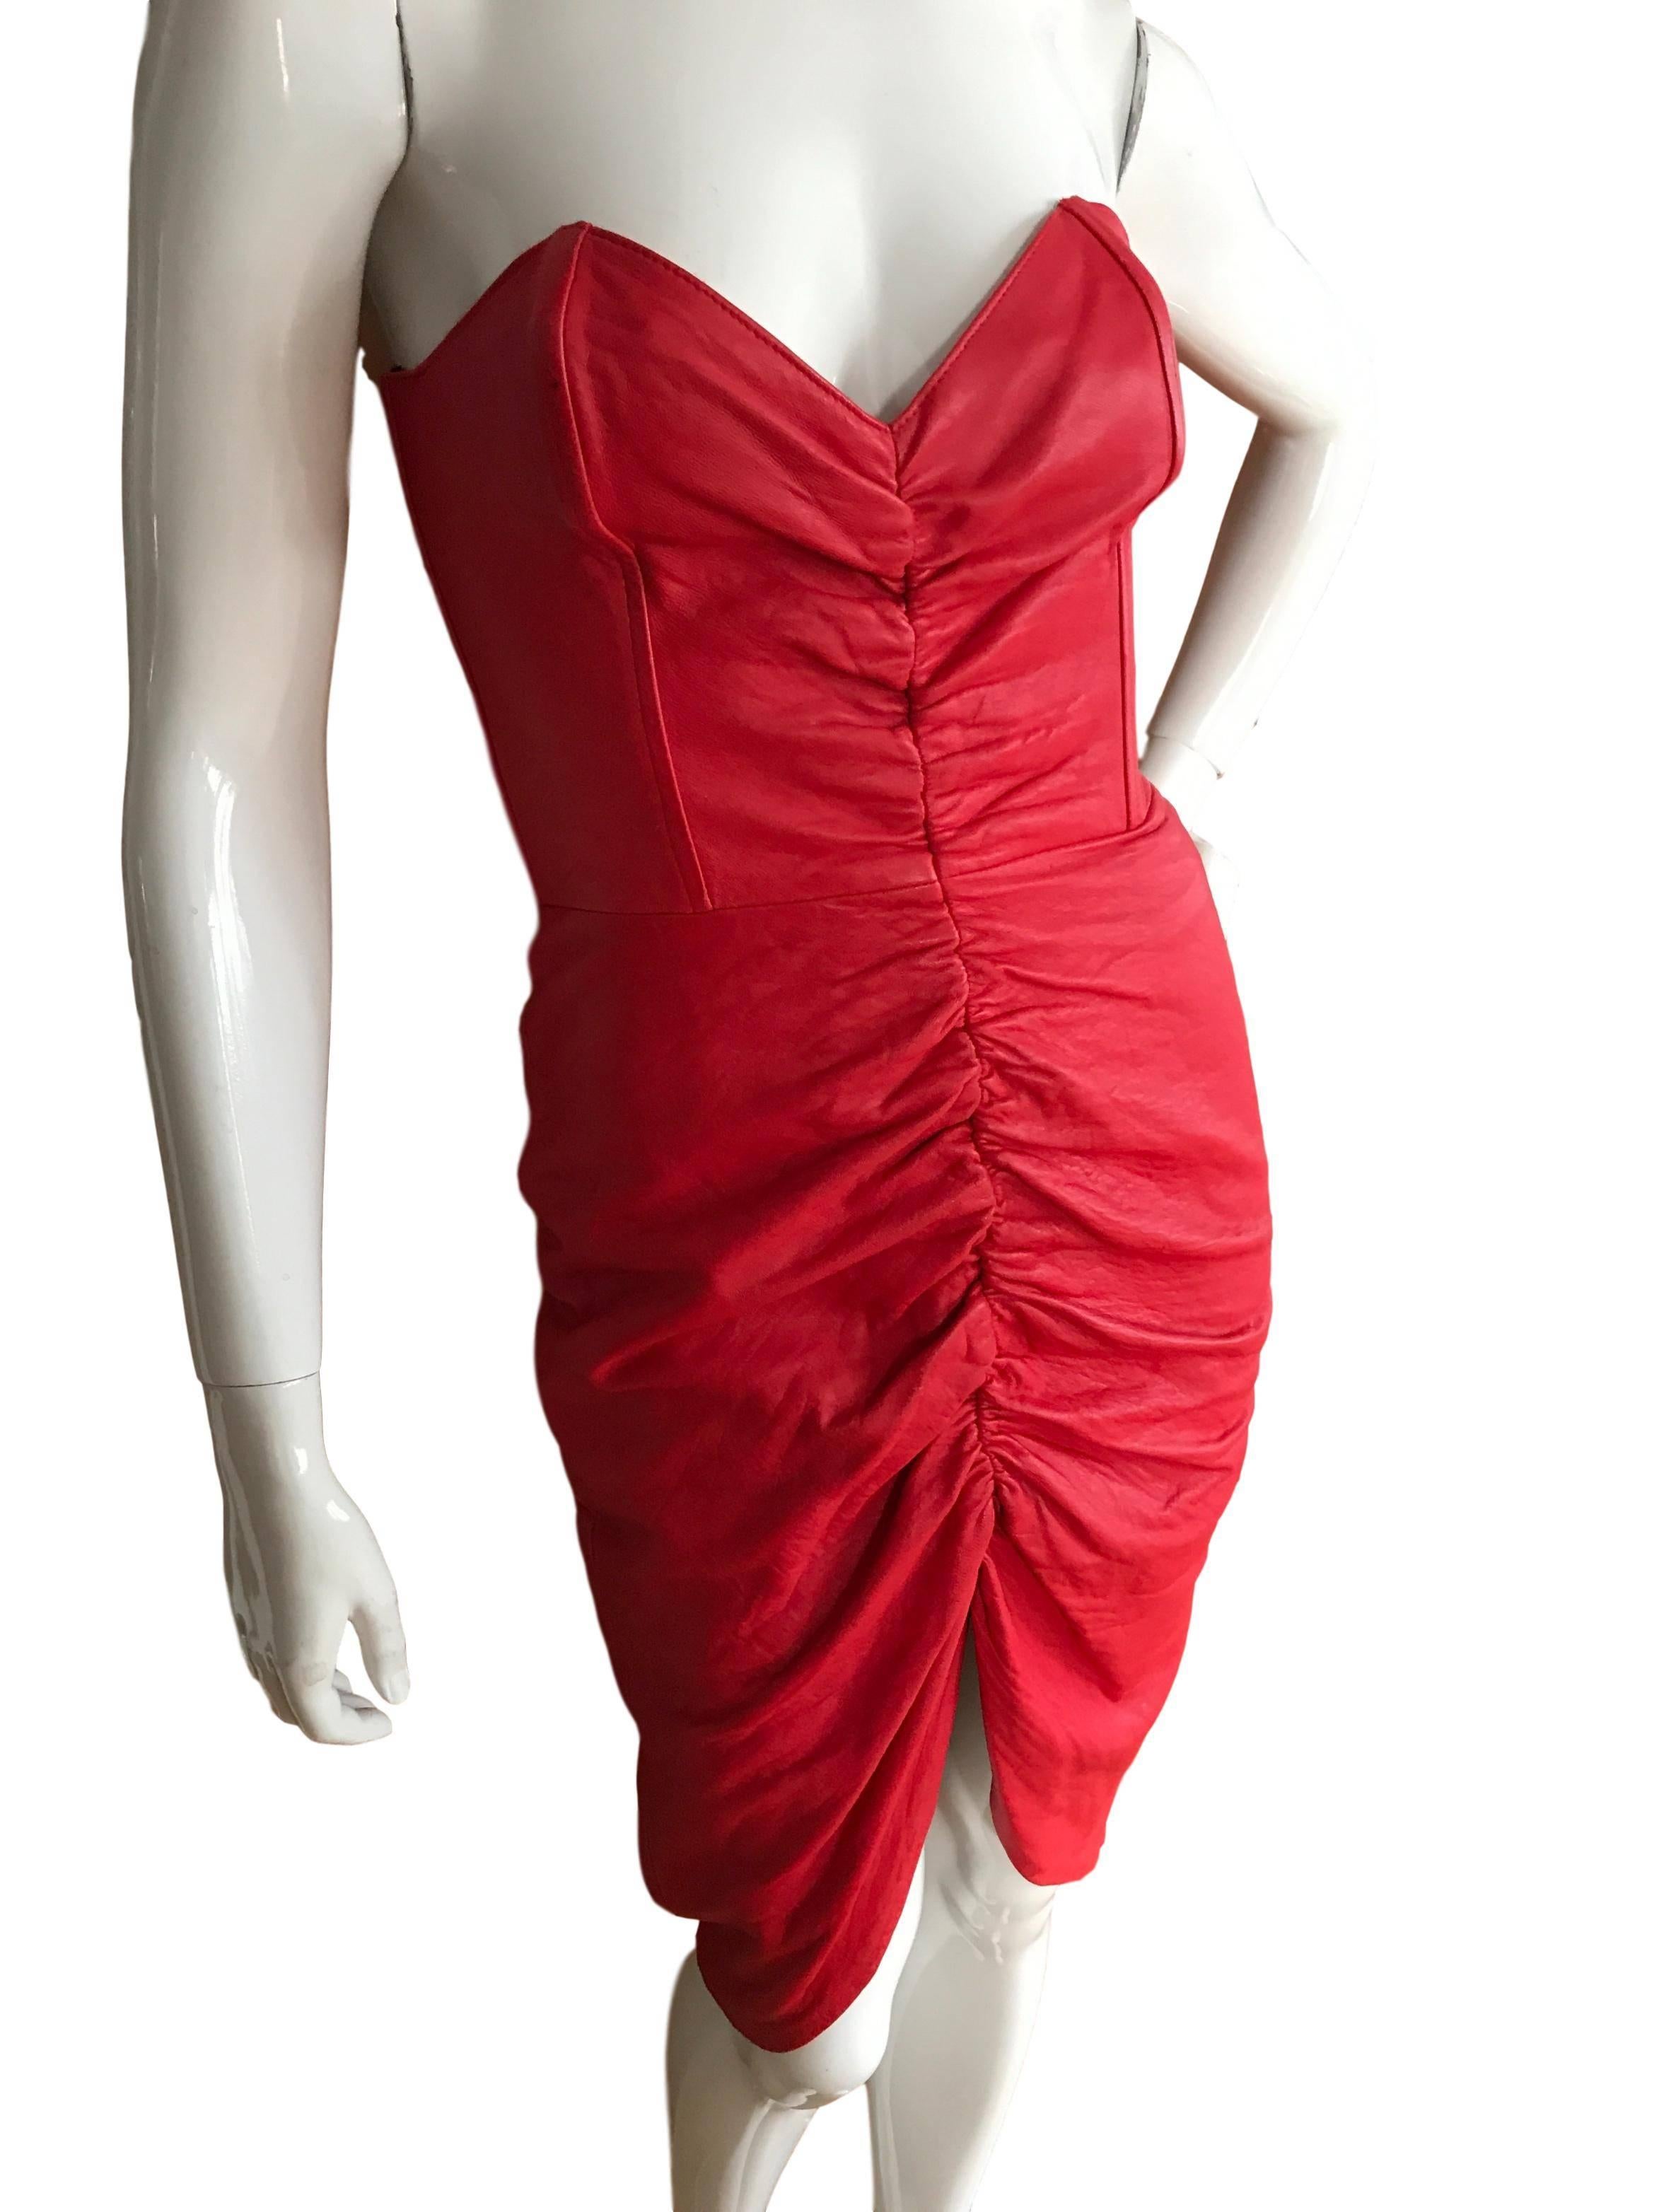 Vintage 1980s Travilla Soft Leather Red Bustier Dress In Excellent Condition For Sale In Portsmouth, Hampshire